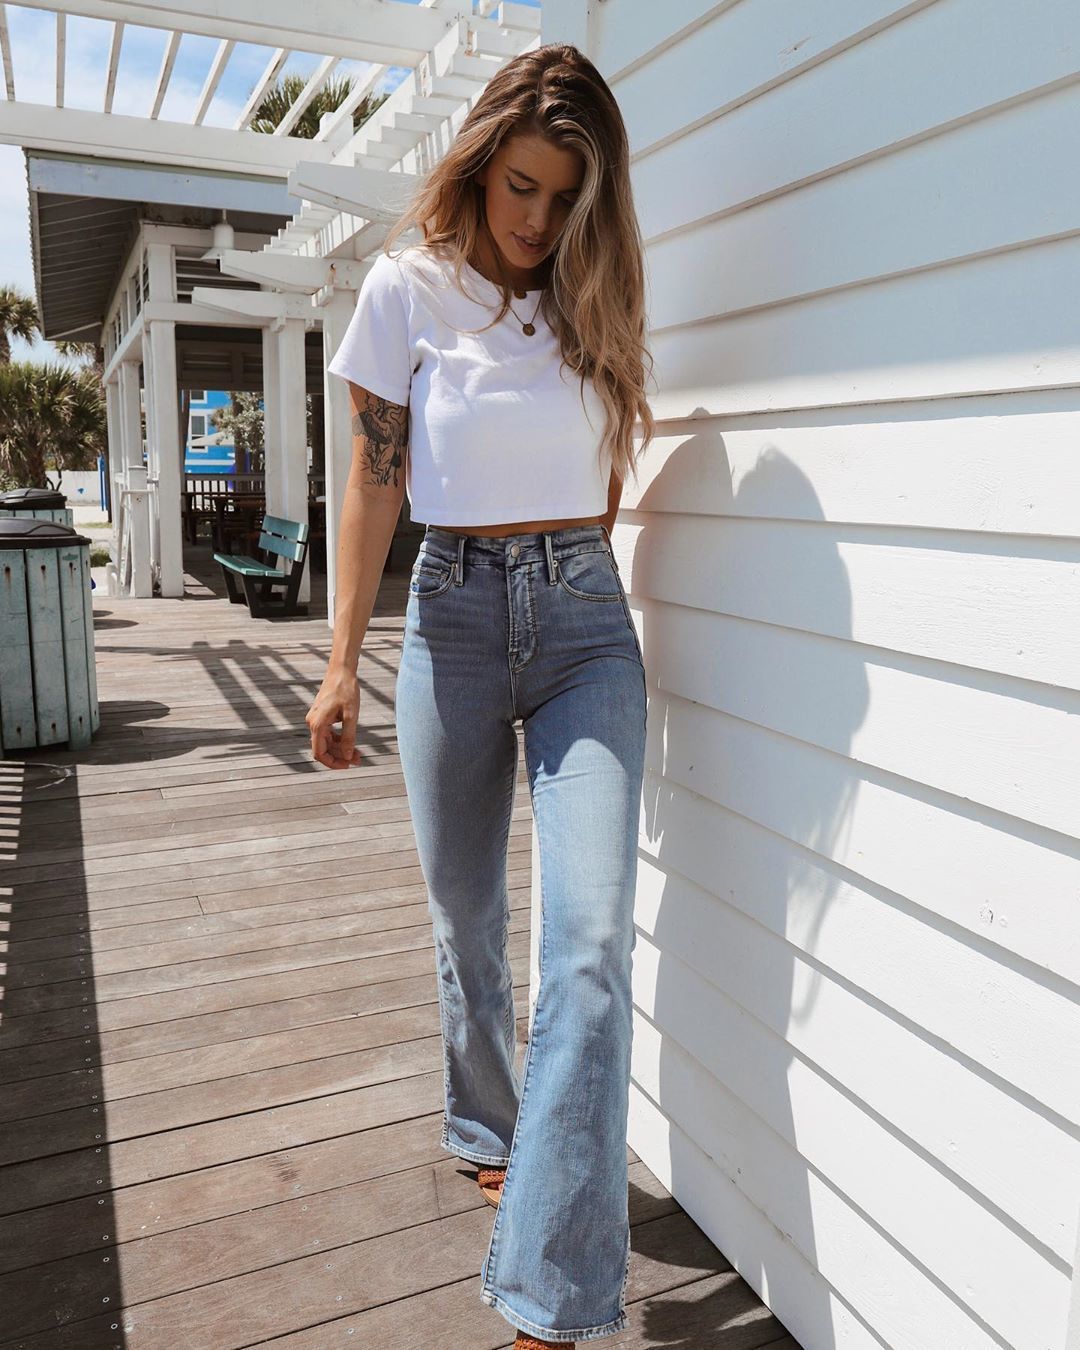 https://picture-cdn.wheretoget.com/ztnk70-l-1350x1350-jeans-flare%20jeans-high%20waisted%20jeans-sandal%20heels-white%20t%20shirt-crop%20tops.jpg